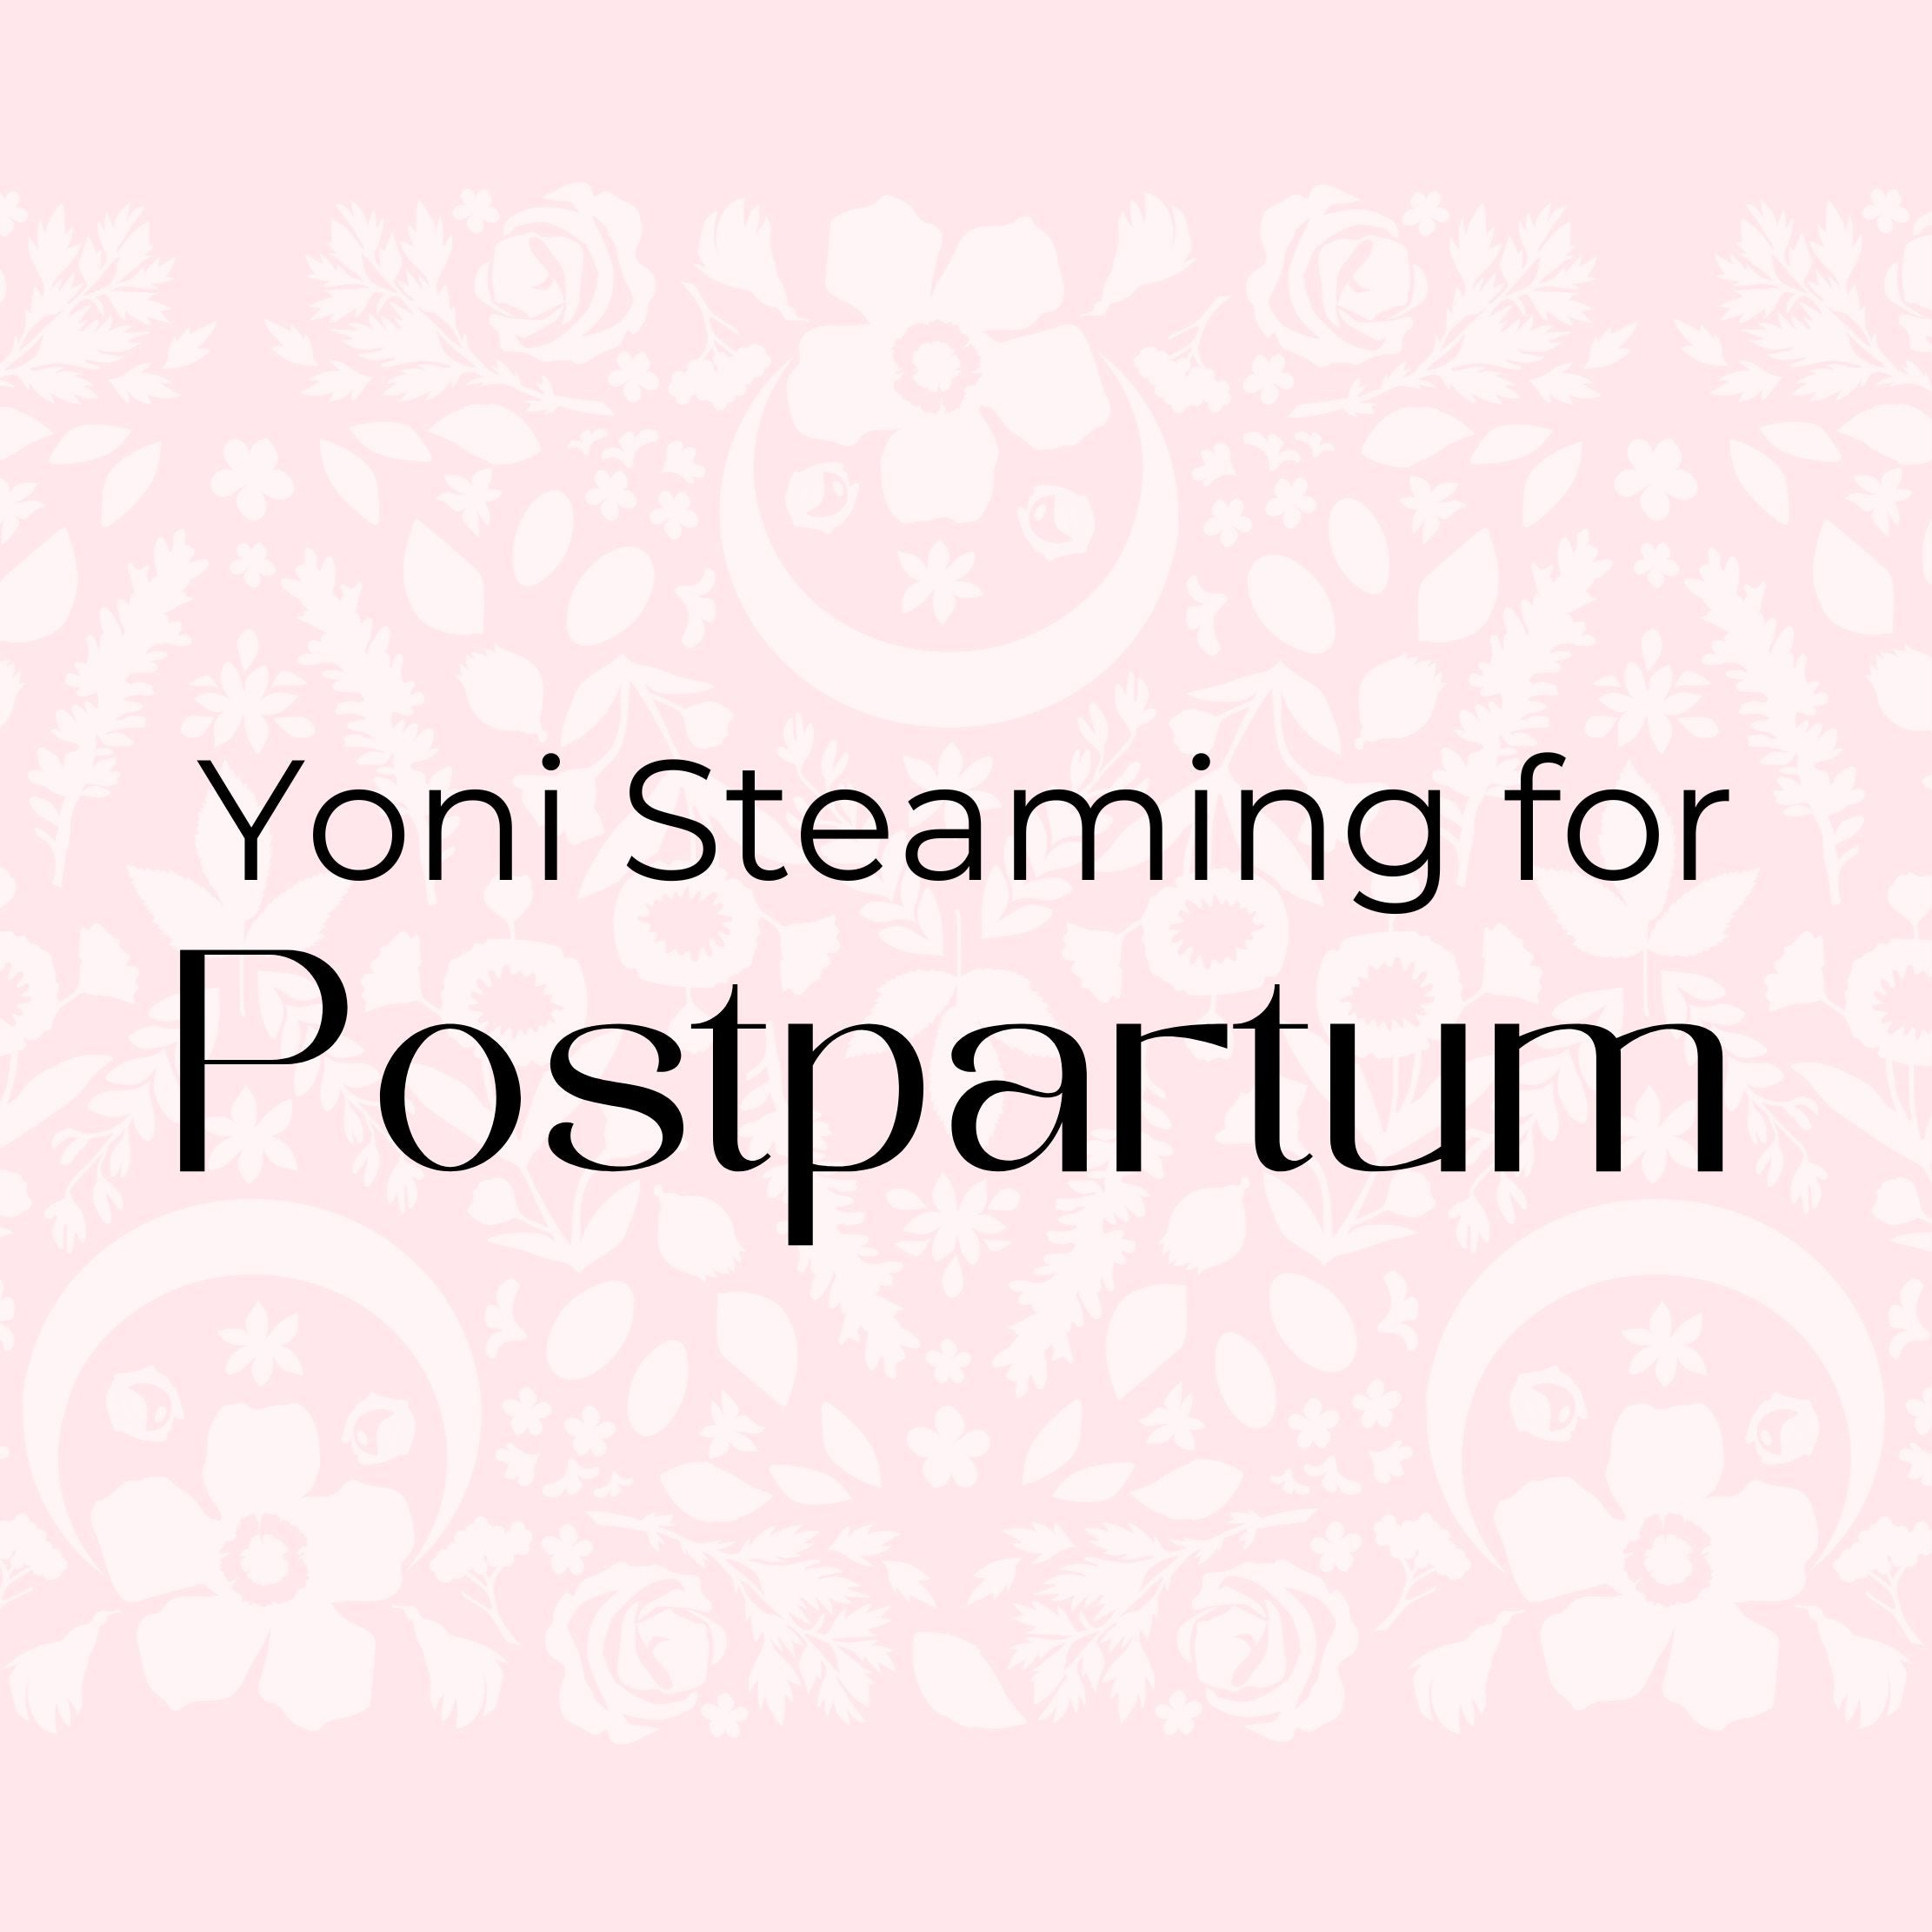 yoni steaming for postpartum